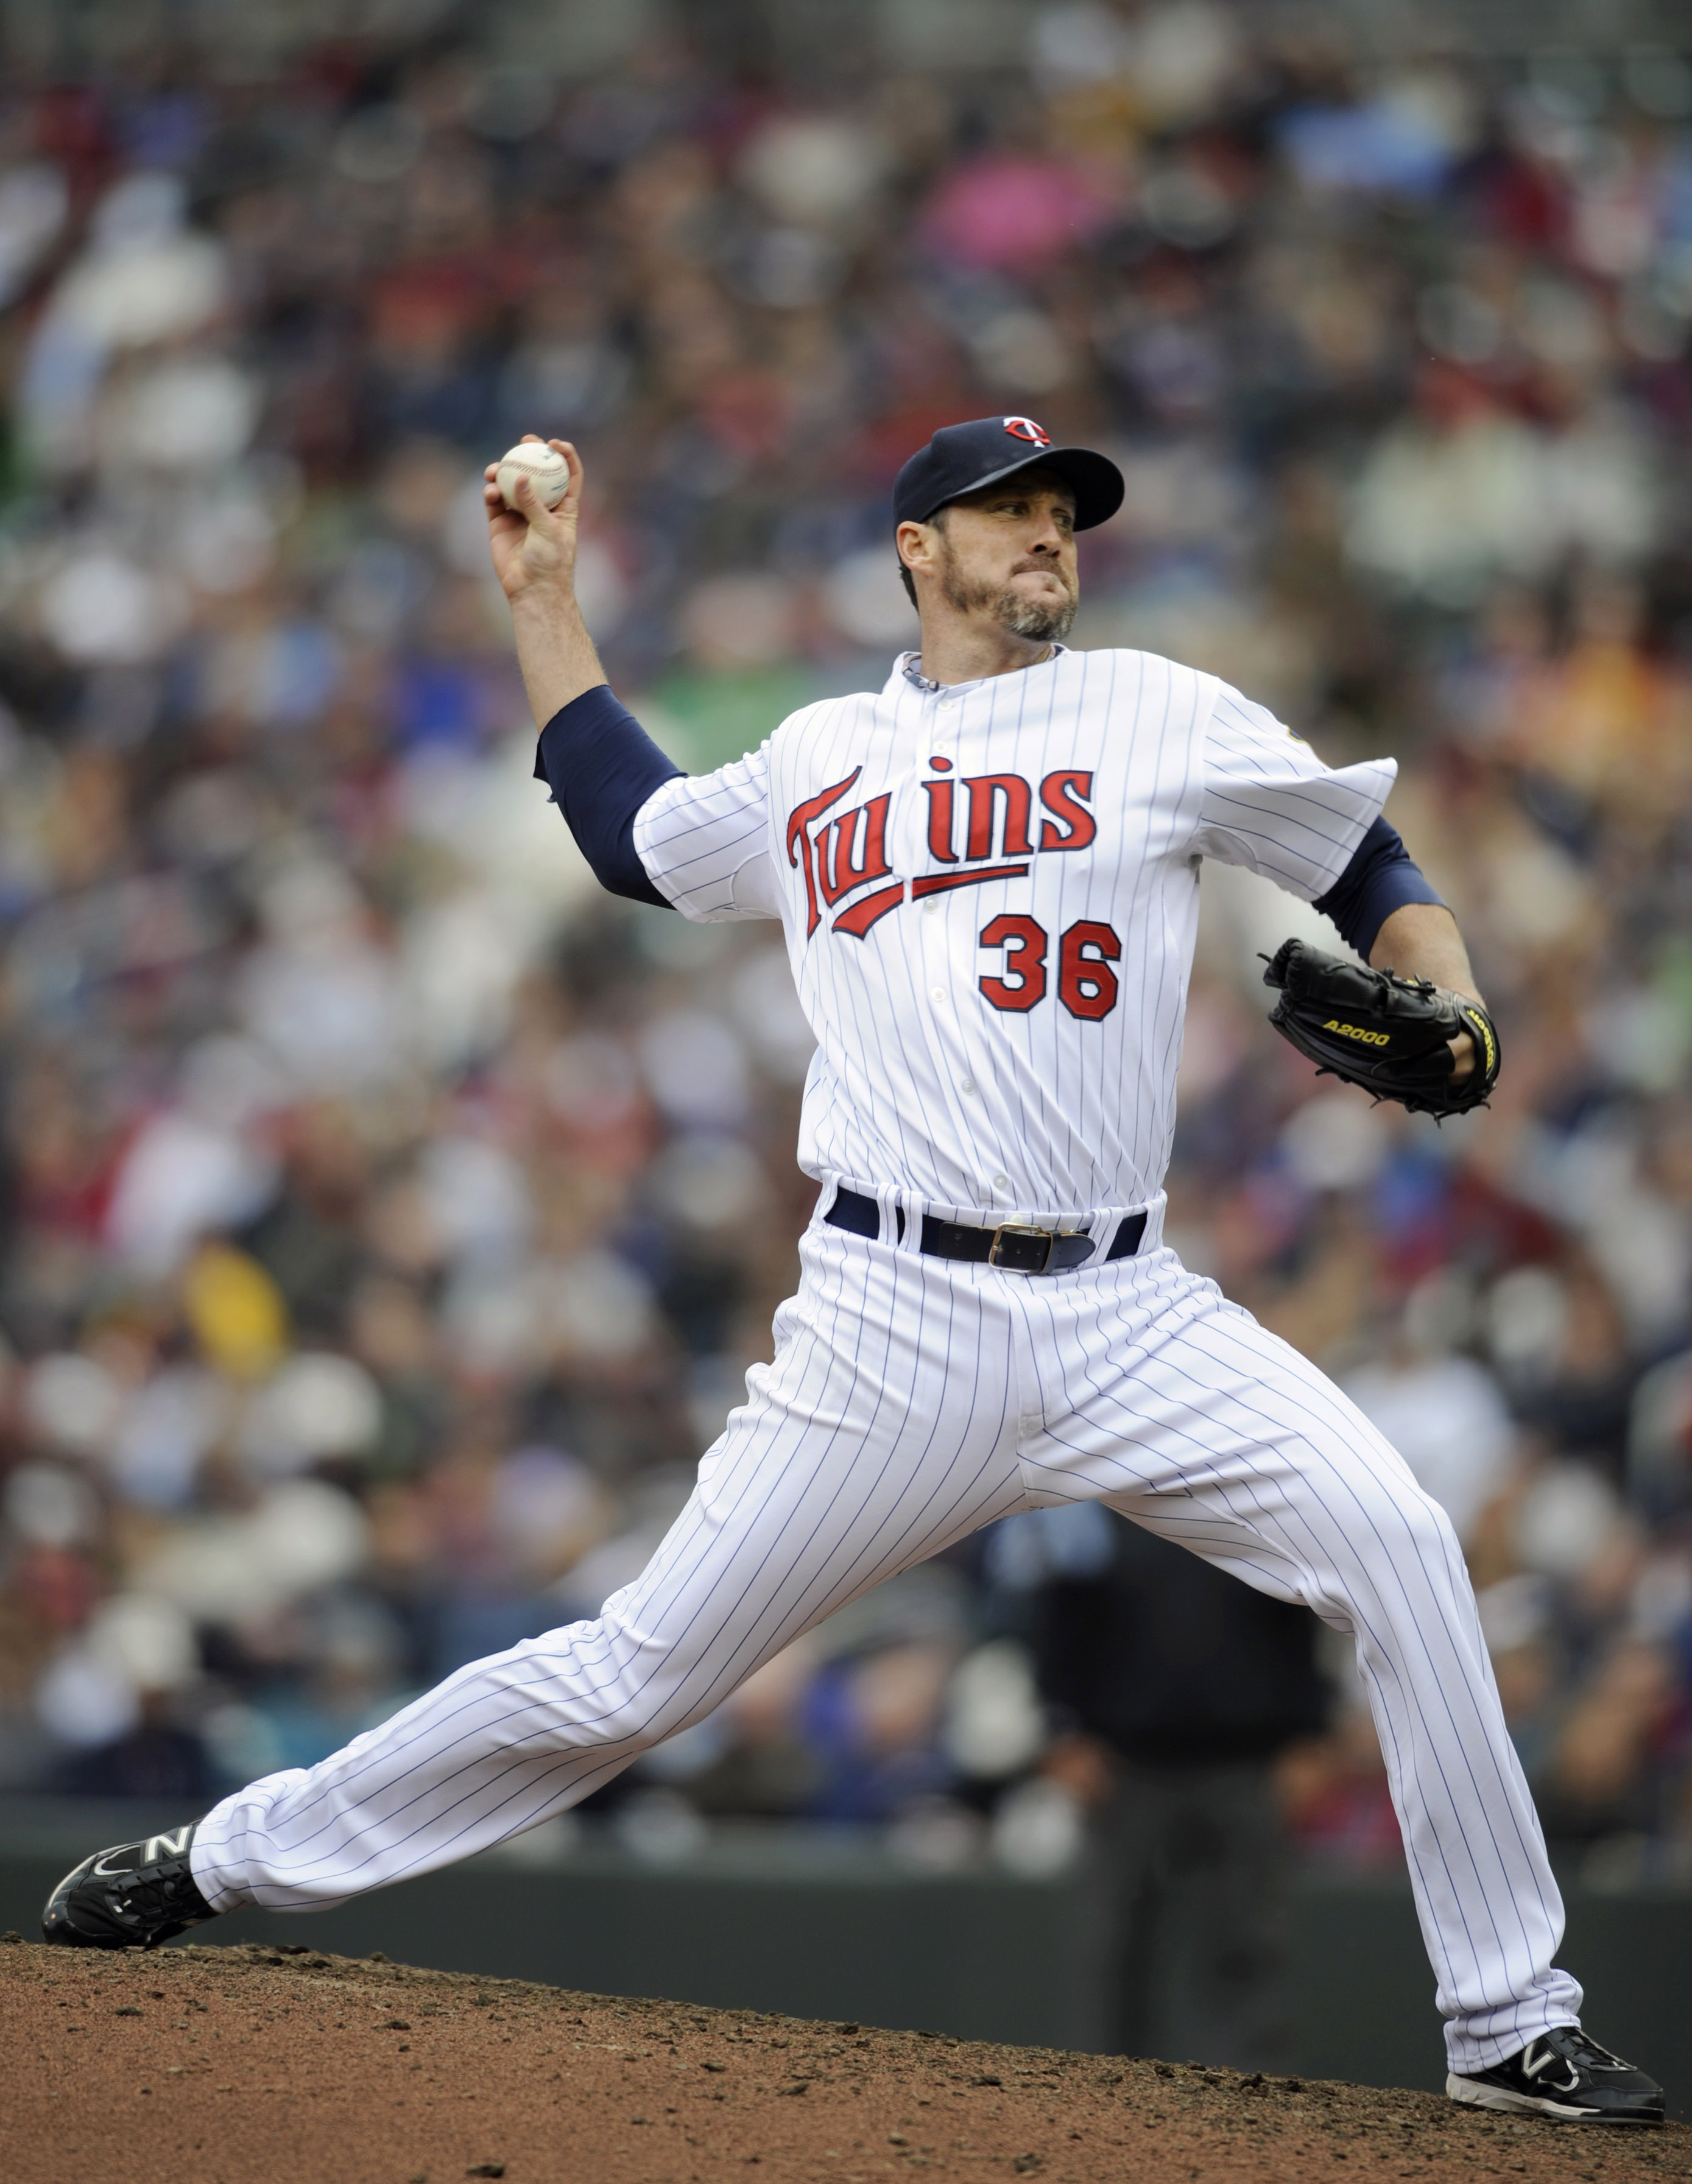 MINNEAPOLIS, MN - APRIL 23: Joe Nathan #36 of the Minnesota Twins pitches against the Cleveland Indians during the ninth inning of their game on April 23, 2011 at Target Field in Minneapolis, Minnesota. (Photo by Hannah Foslien/Getty Images)